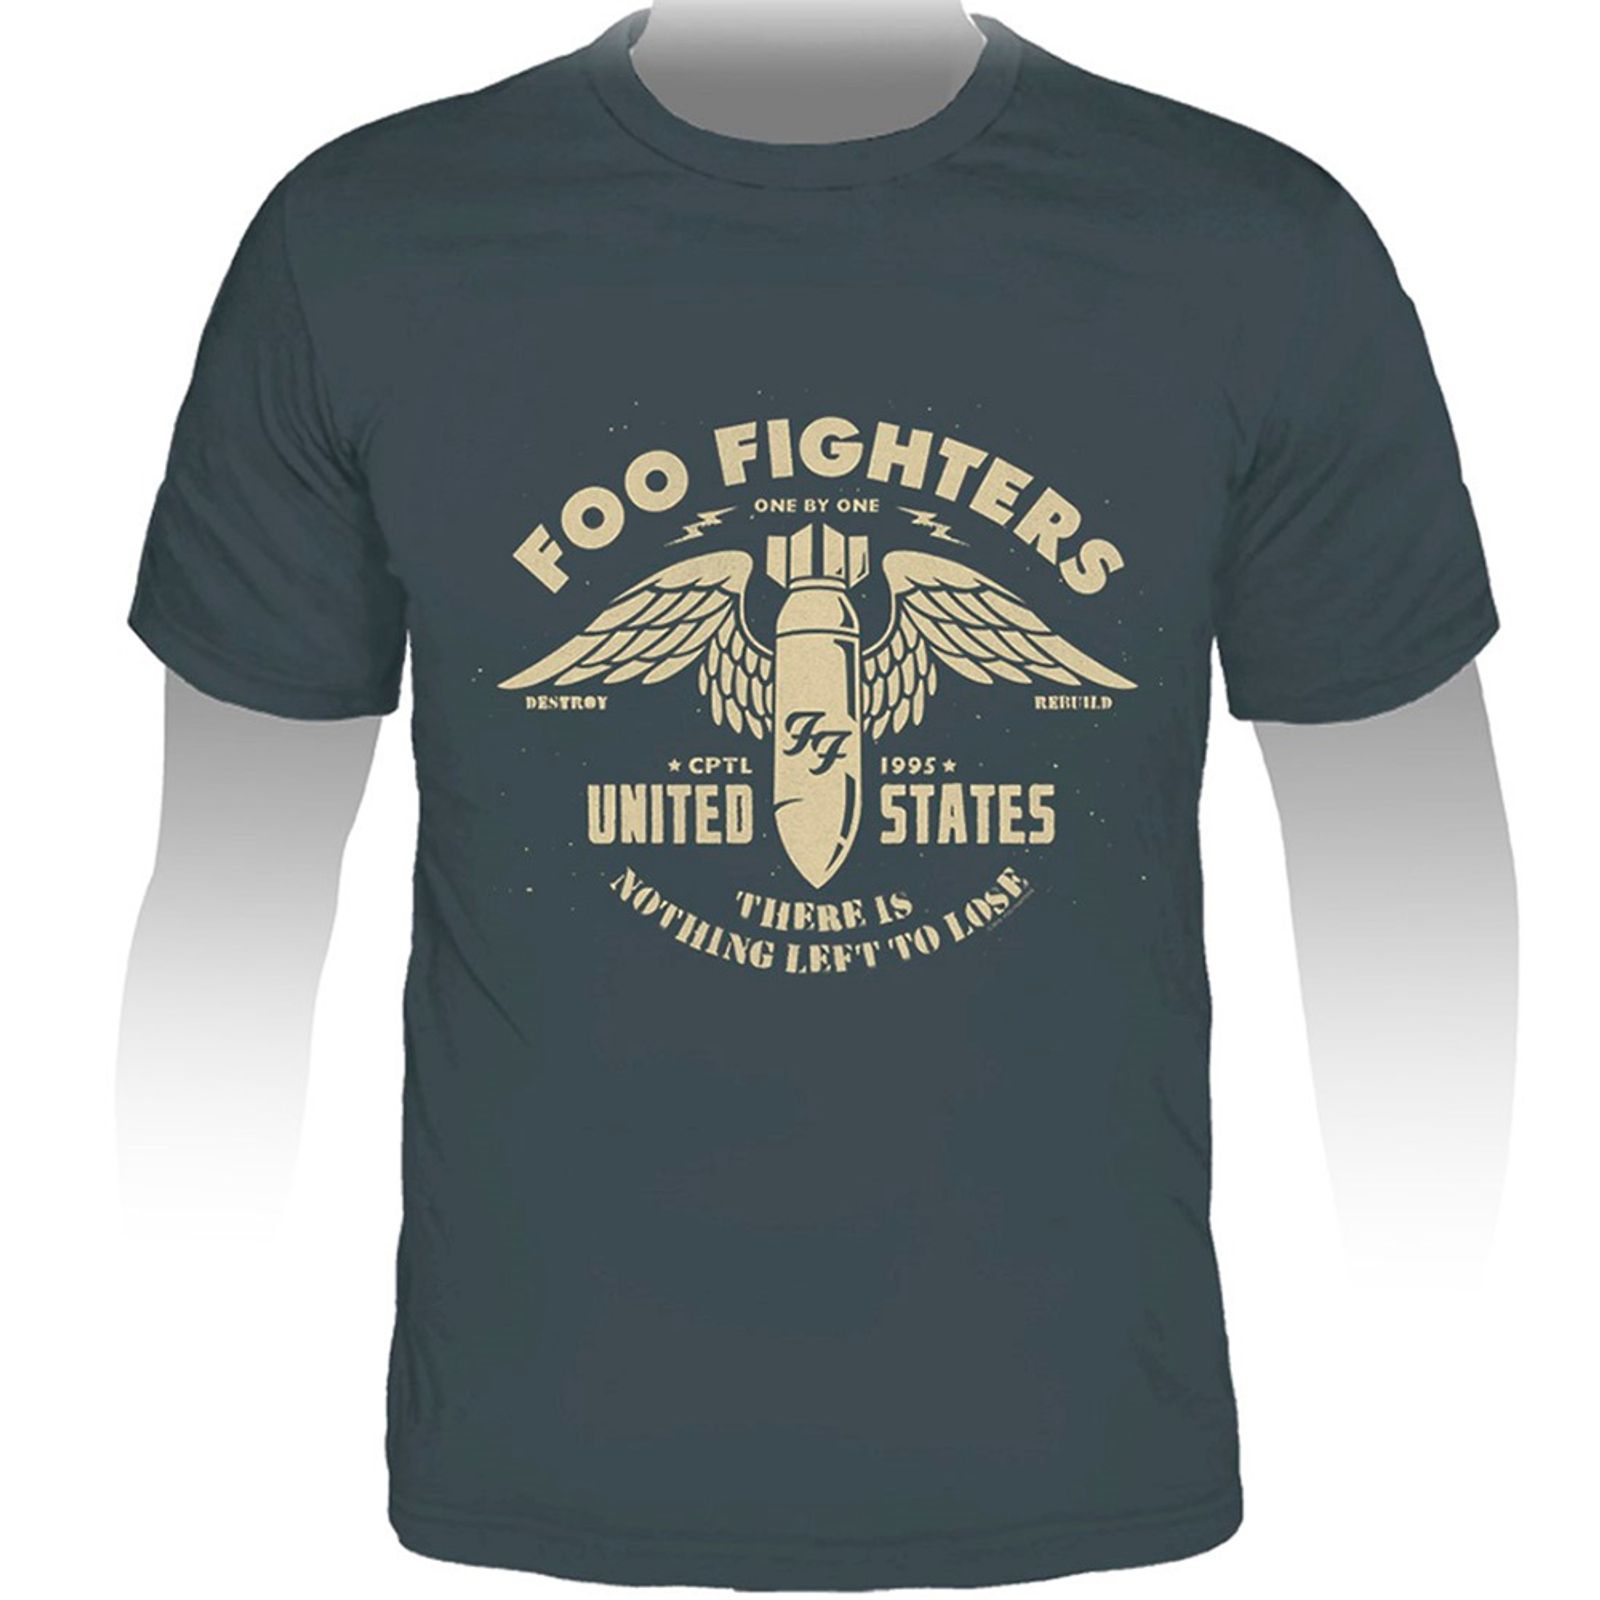 Partially Primitive Concession Camiseta Stamp Foo Fighters One by One TS1104 - galleryrock